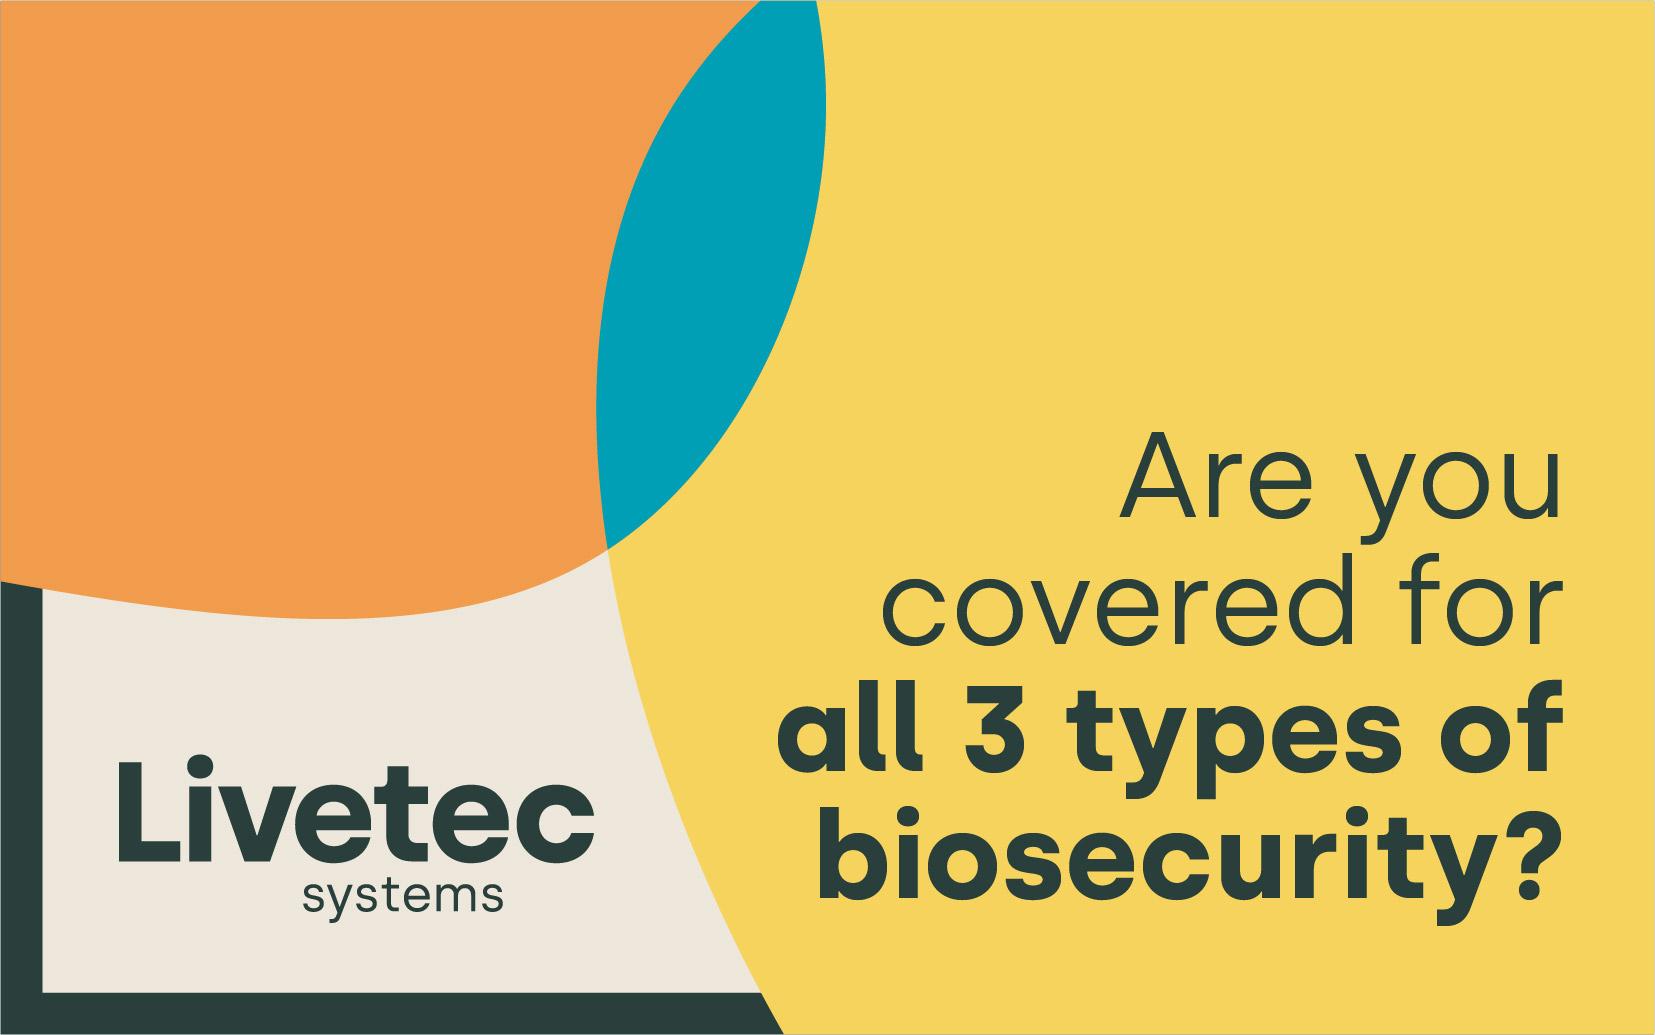 Are you covered for all three types of biosecurity?